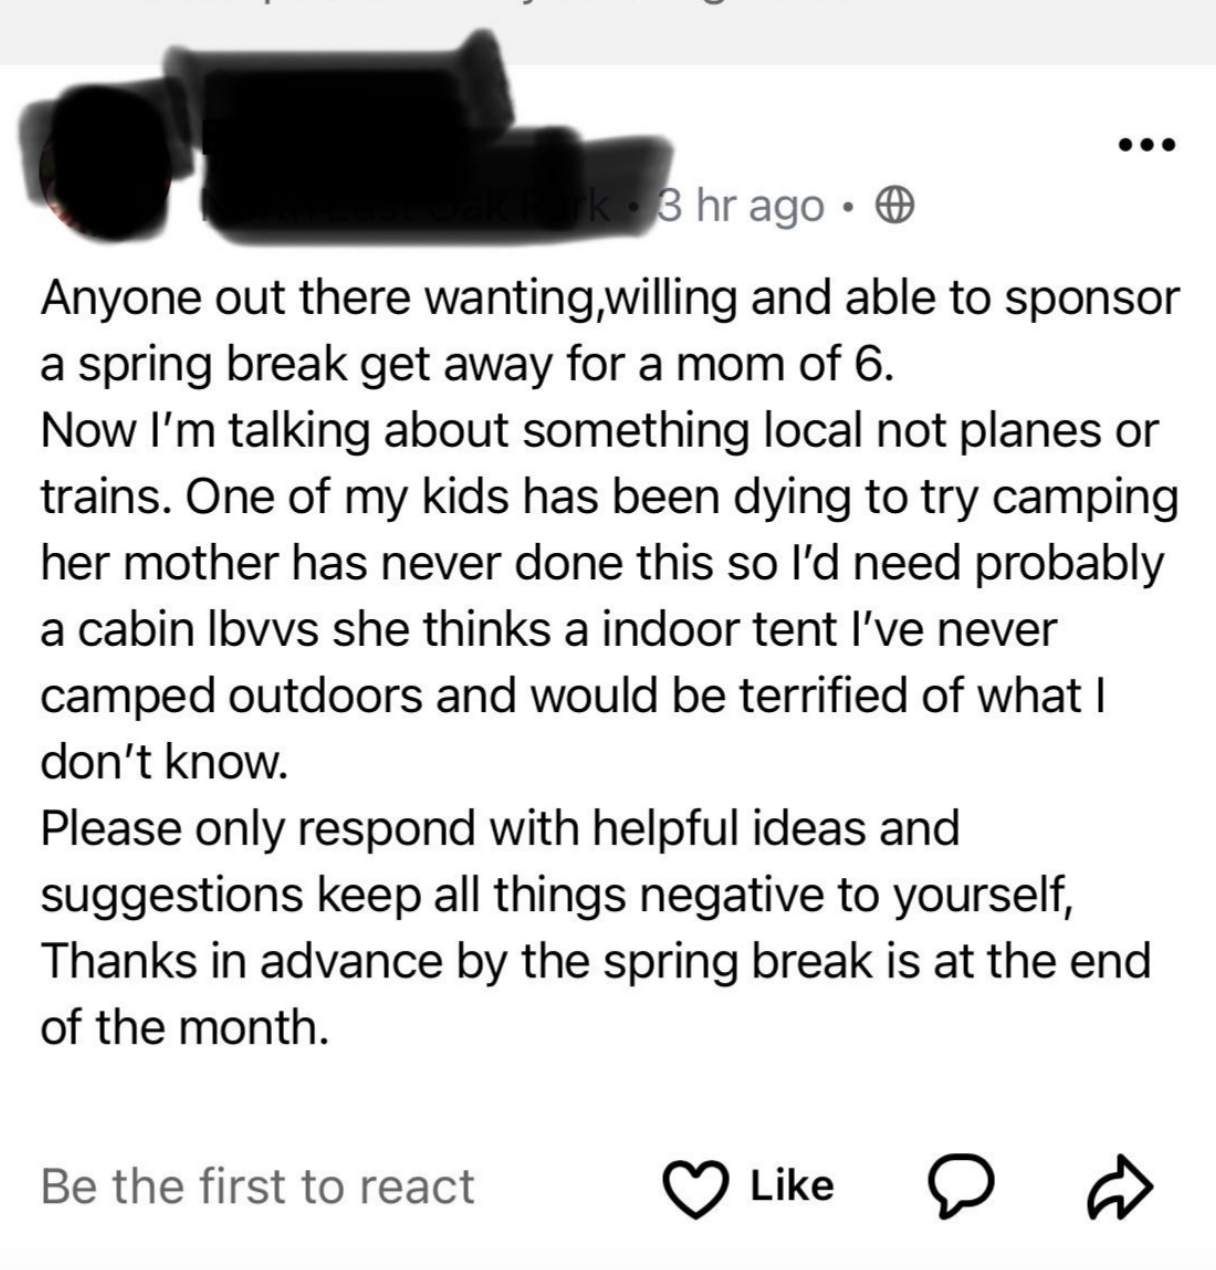 &quot;Anyone out there wanting,willing and able to sponsor a spring break get away for a mom of 6.&quot;